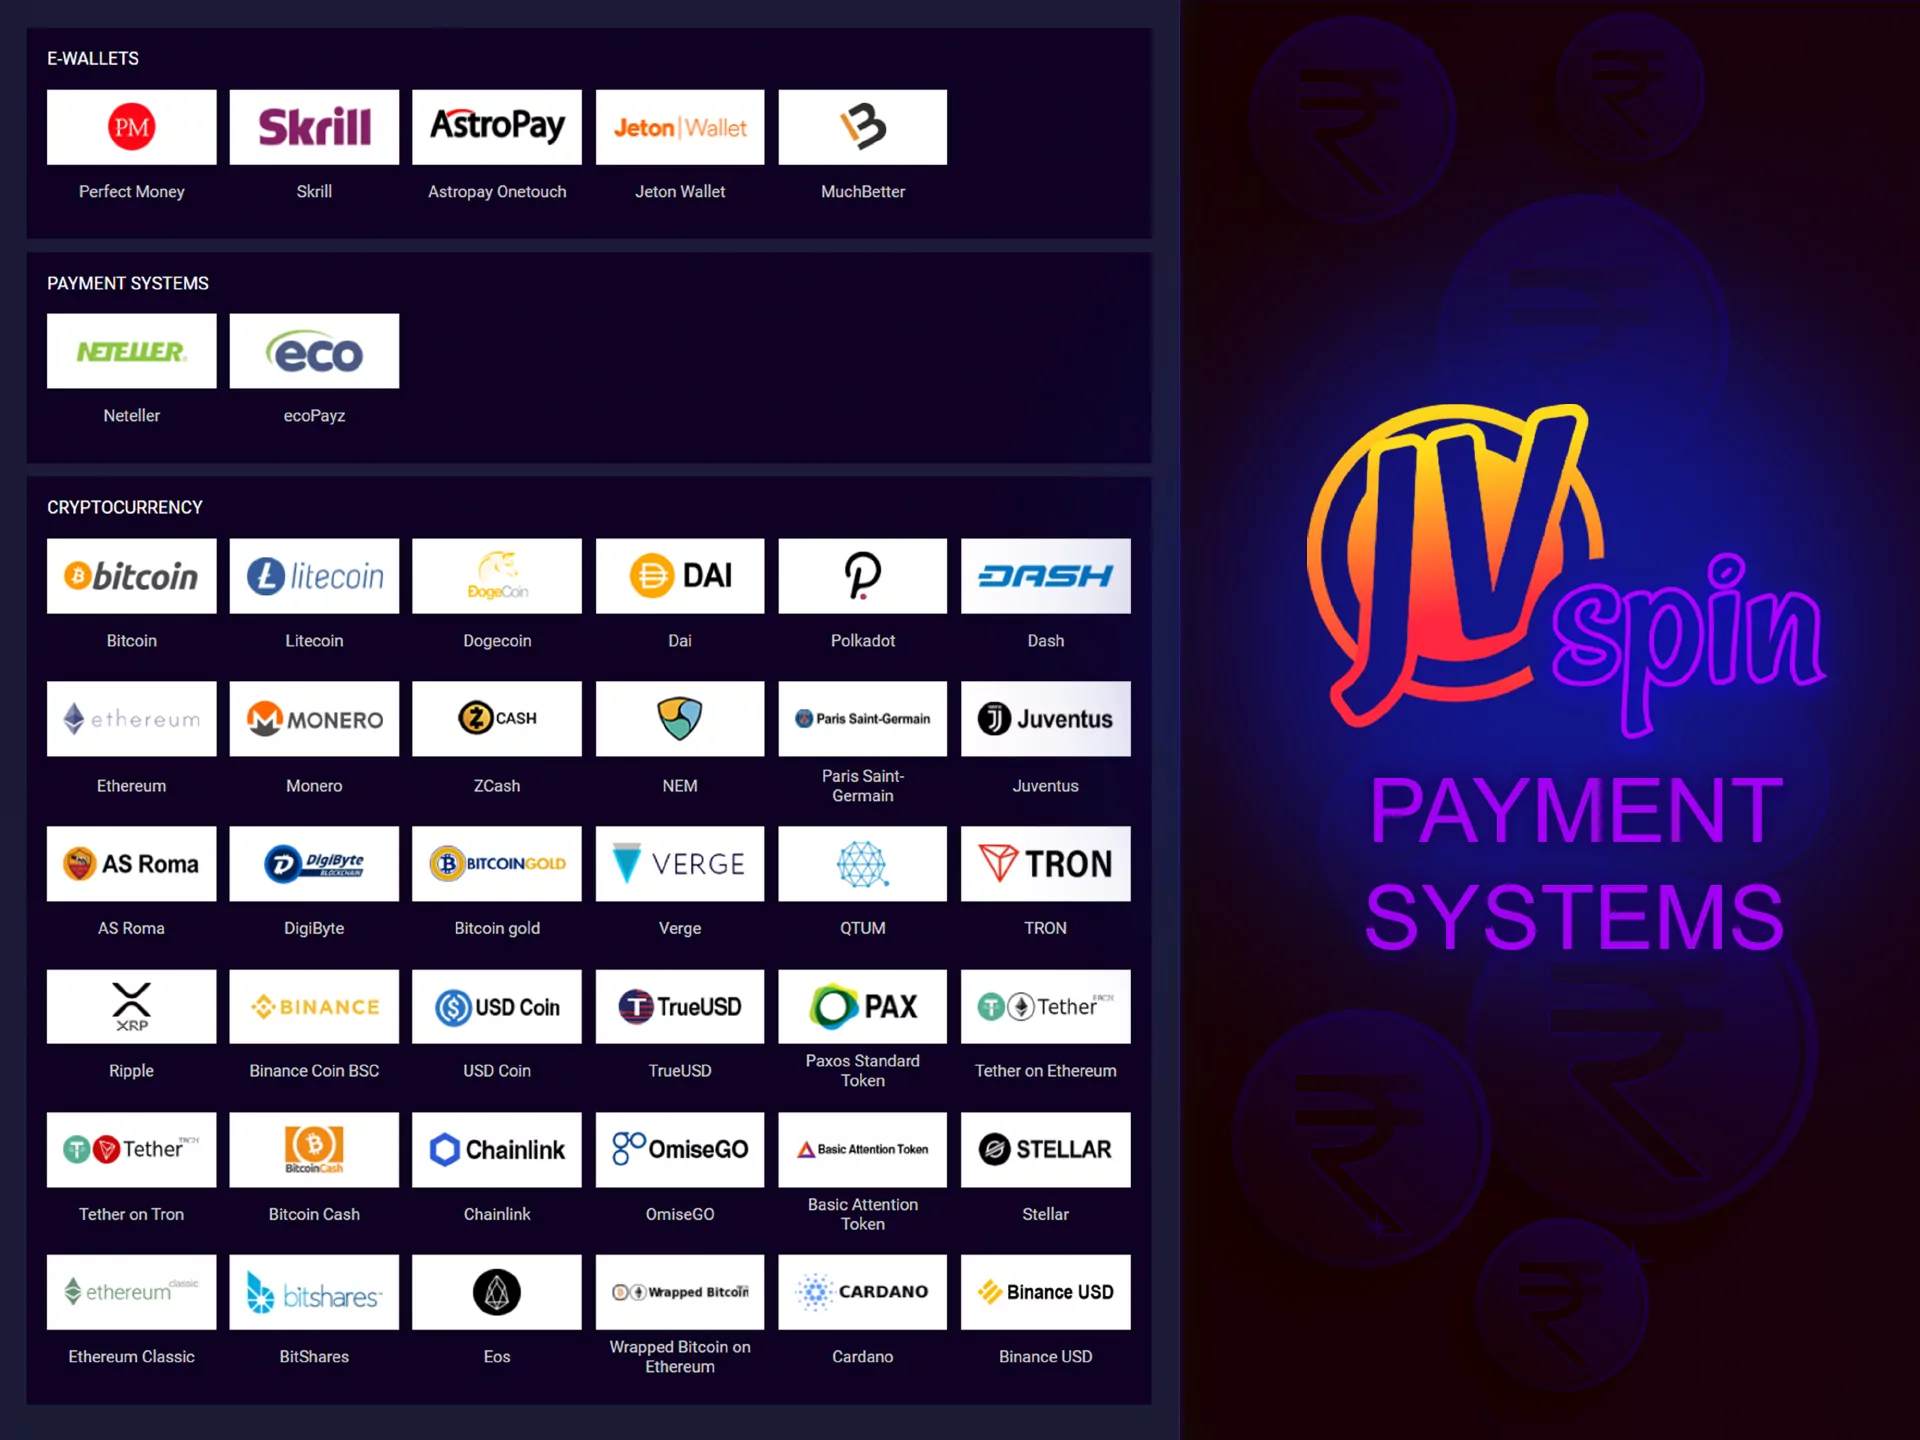 Here is a list of payment systems to which you can withdraw winnings from the JVSpin Casino account.